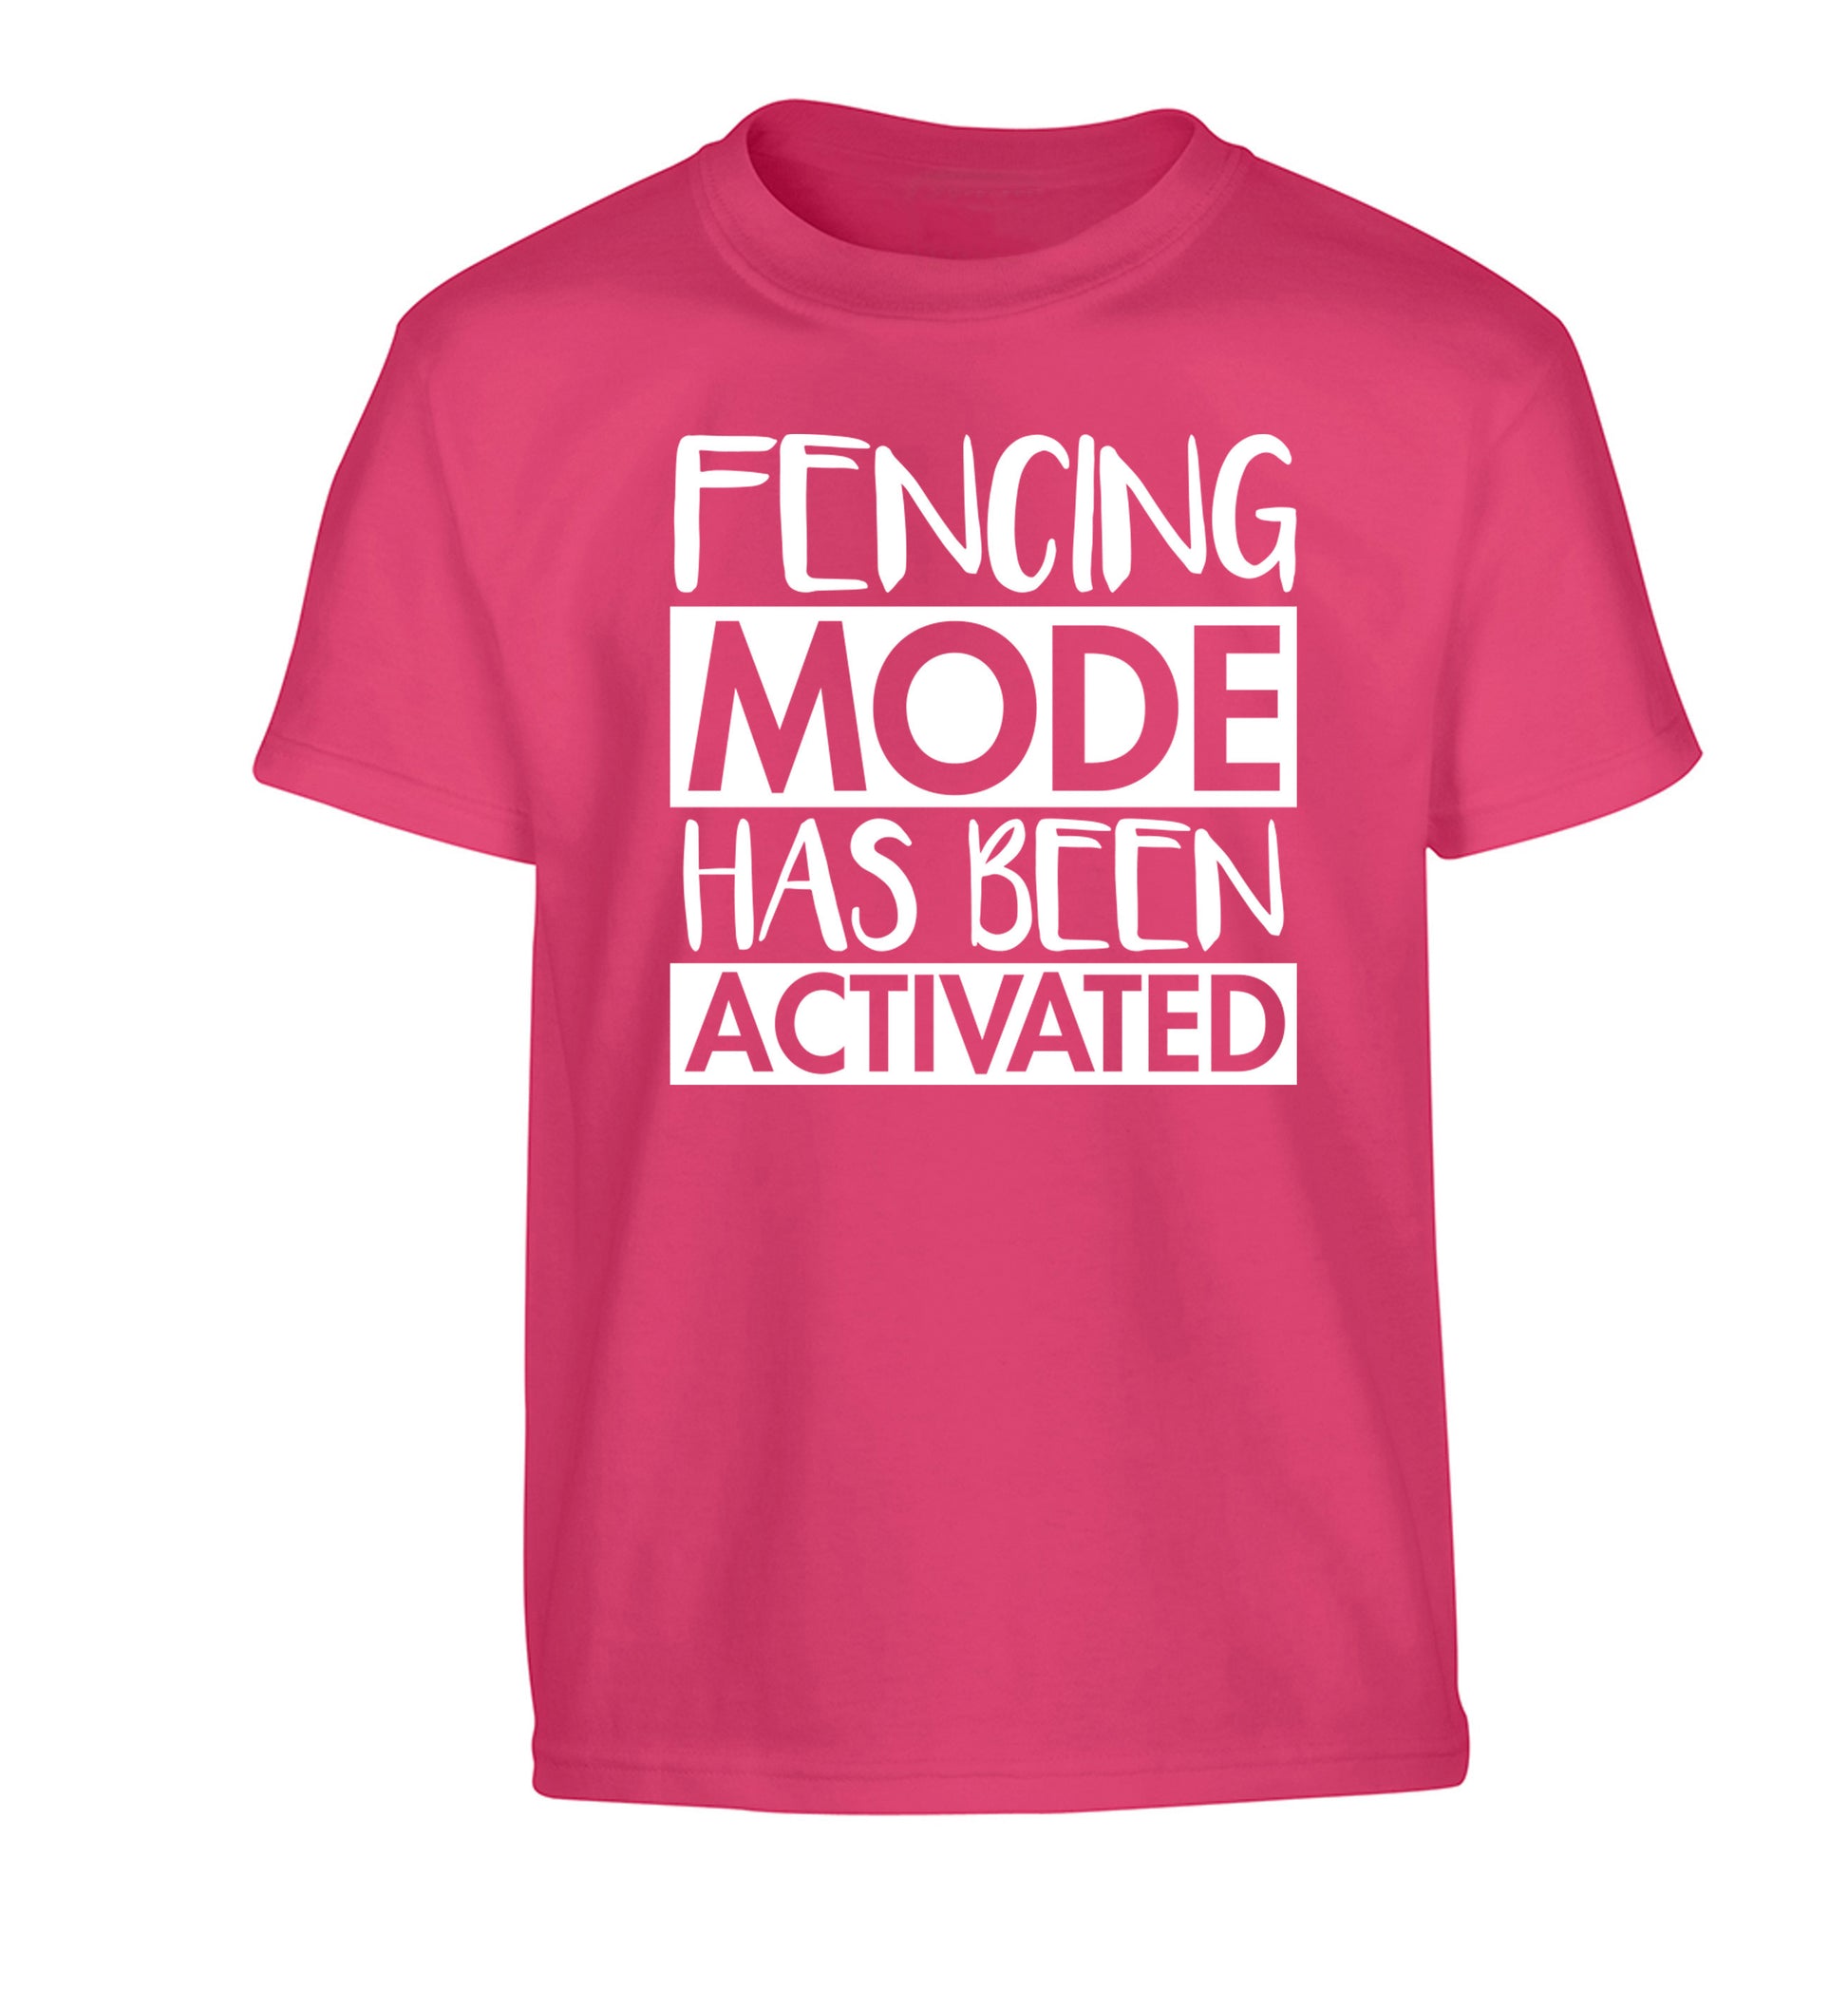 Fencing mode activated Children's pink Tshirt 12-14 Years